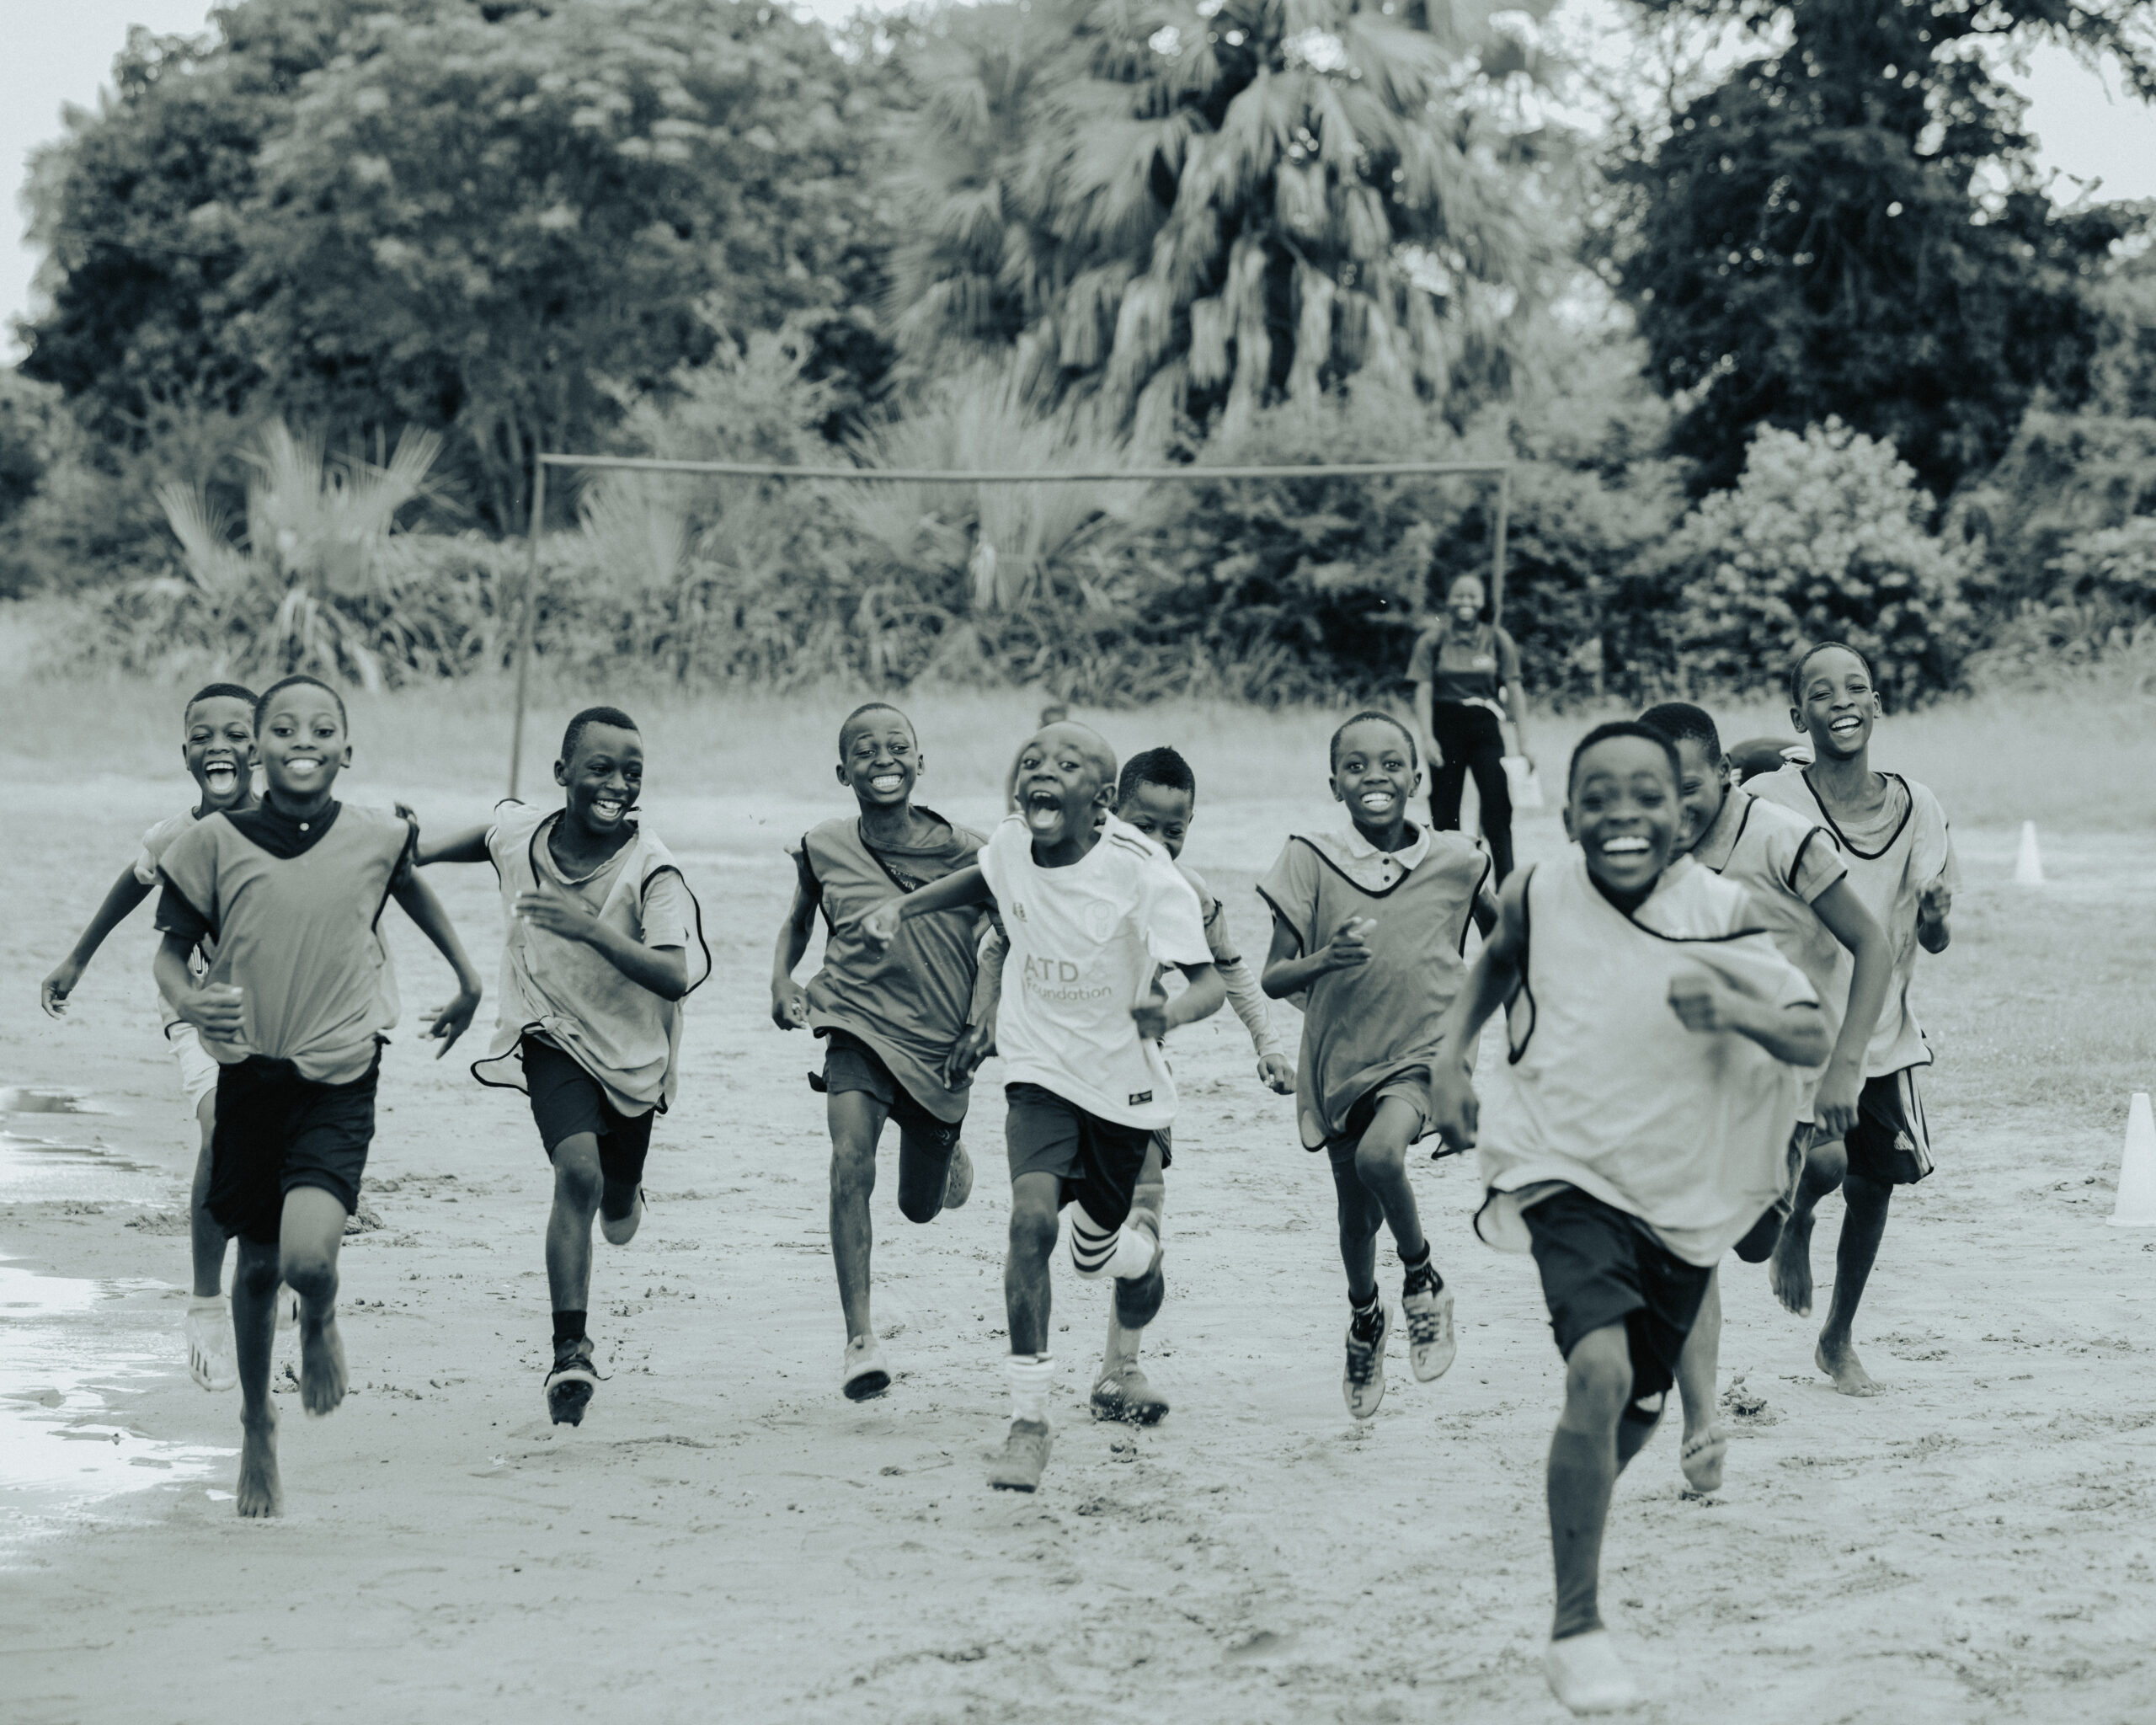 A photograph of a group of Zambian boys running.